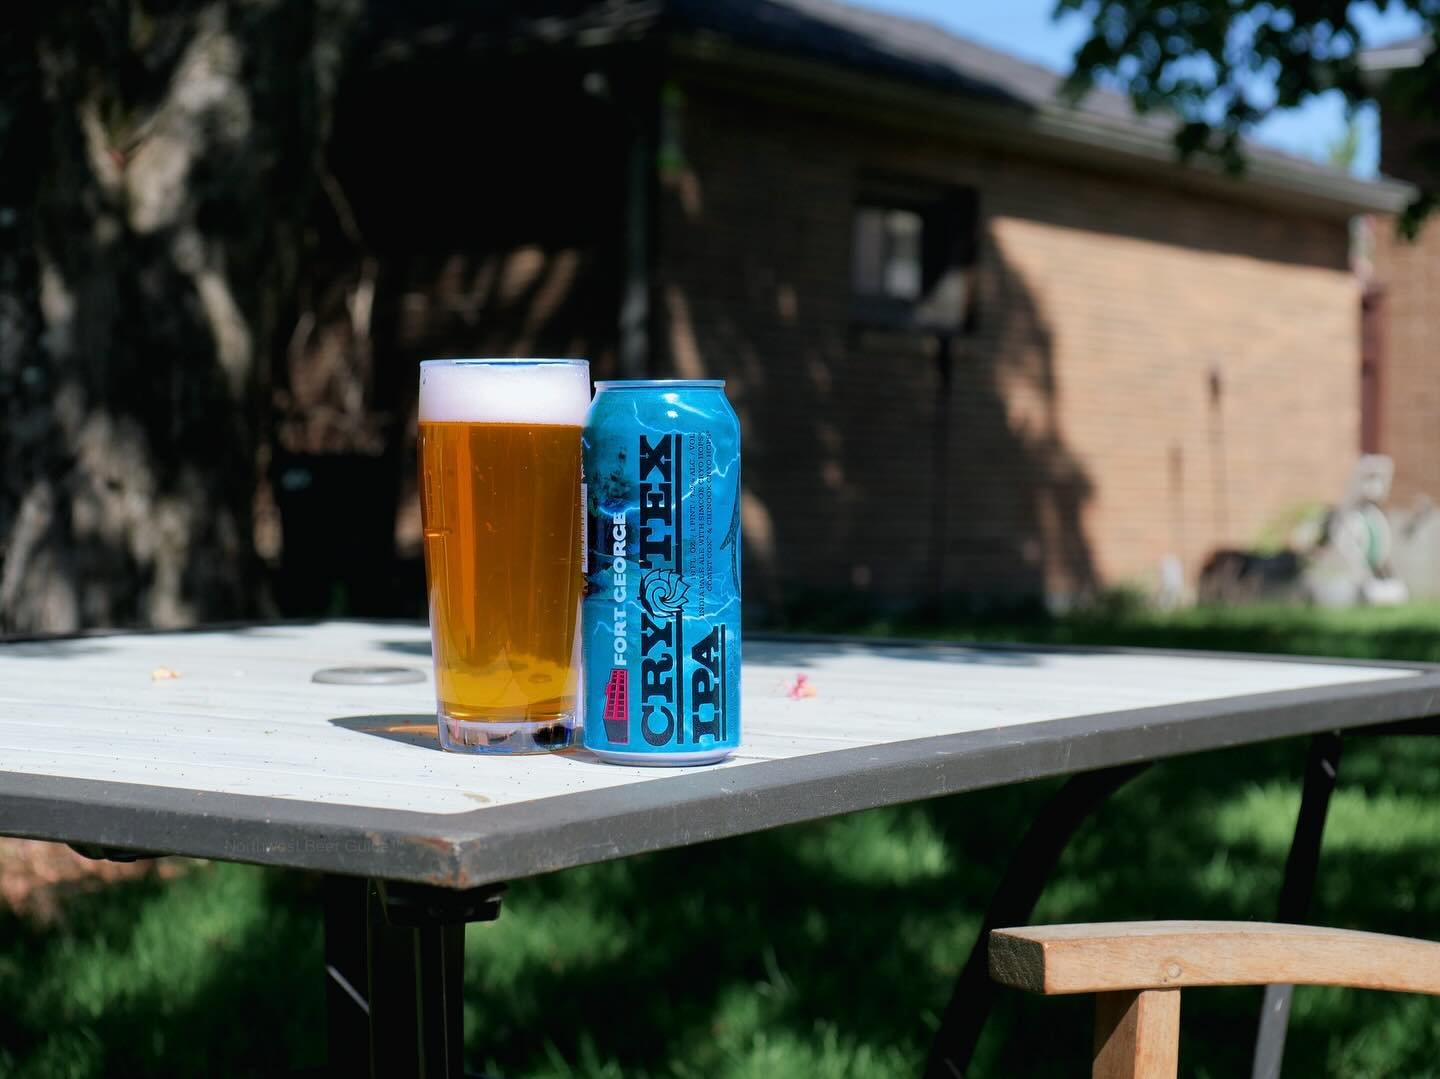 Celebrating the 17th anniversary of Vortex IPA, @fortgeorgebeer brewing designated April a month to celebrate!
During that period, the brewery even collaborated with the likes of @block15brewing.
On top of that, the brewery re-released their Double D